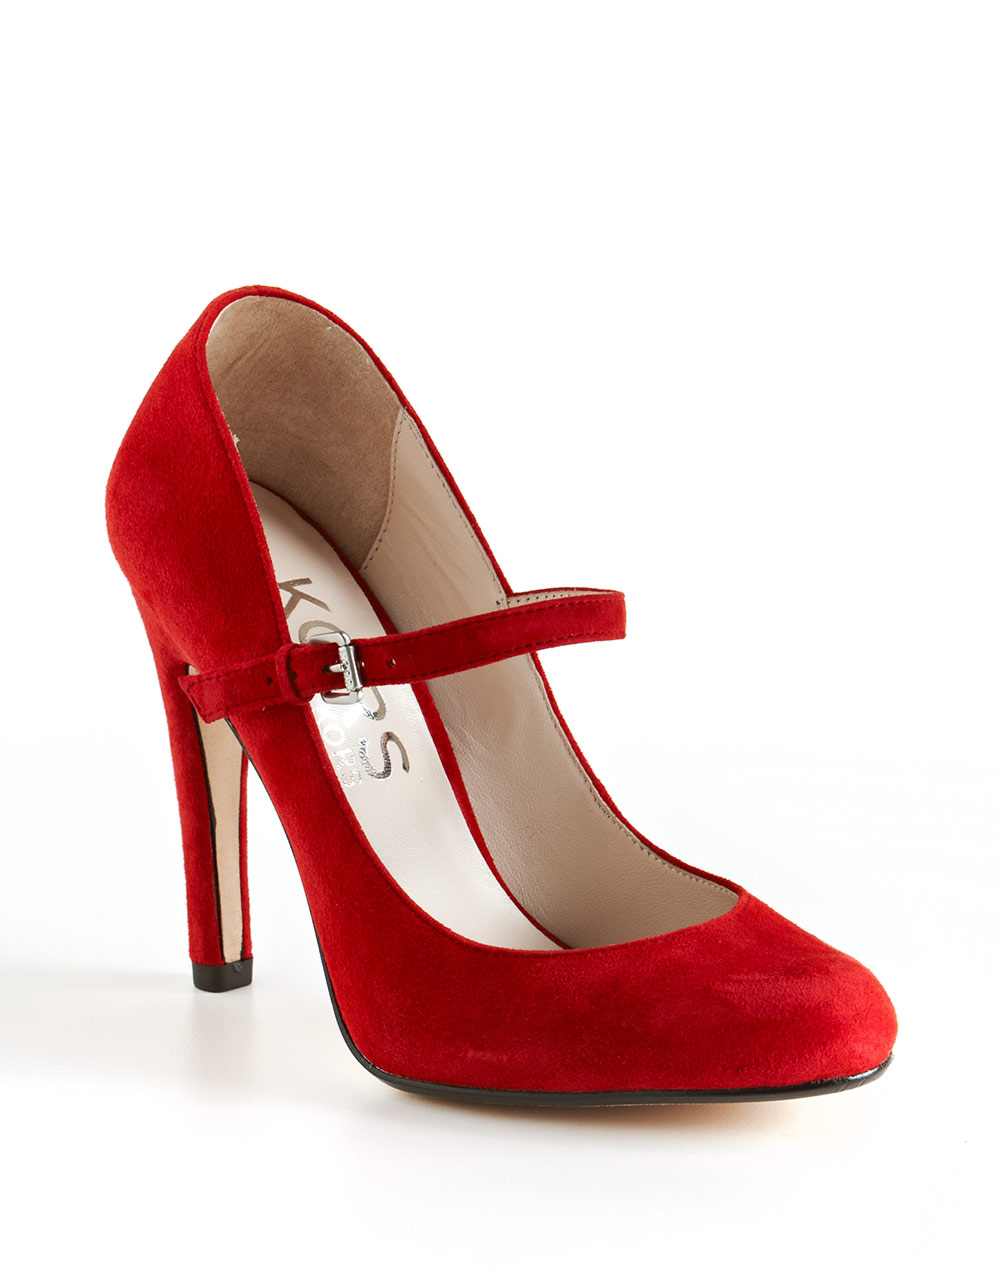 Lyst - Kors by michael kors Galli Leather Mary Jane Pumps in Red